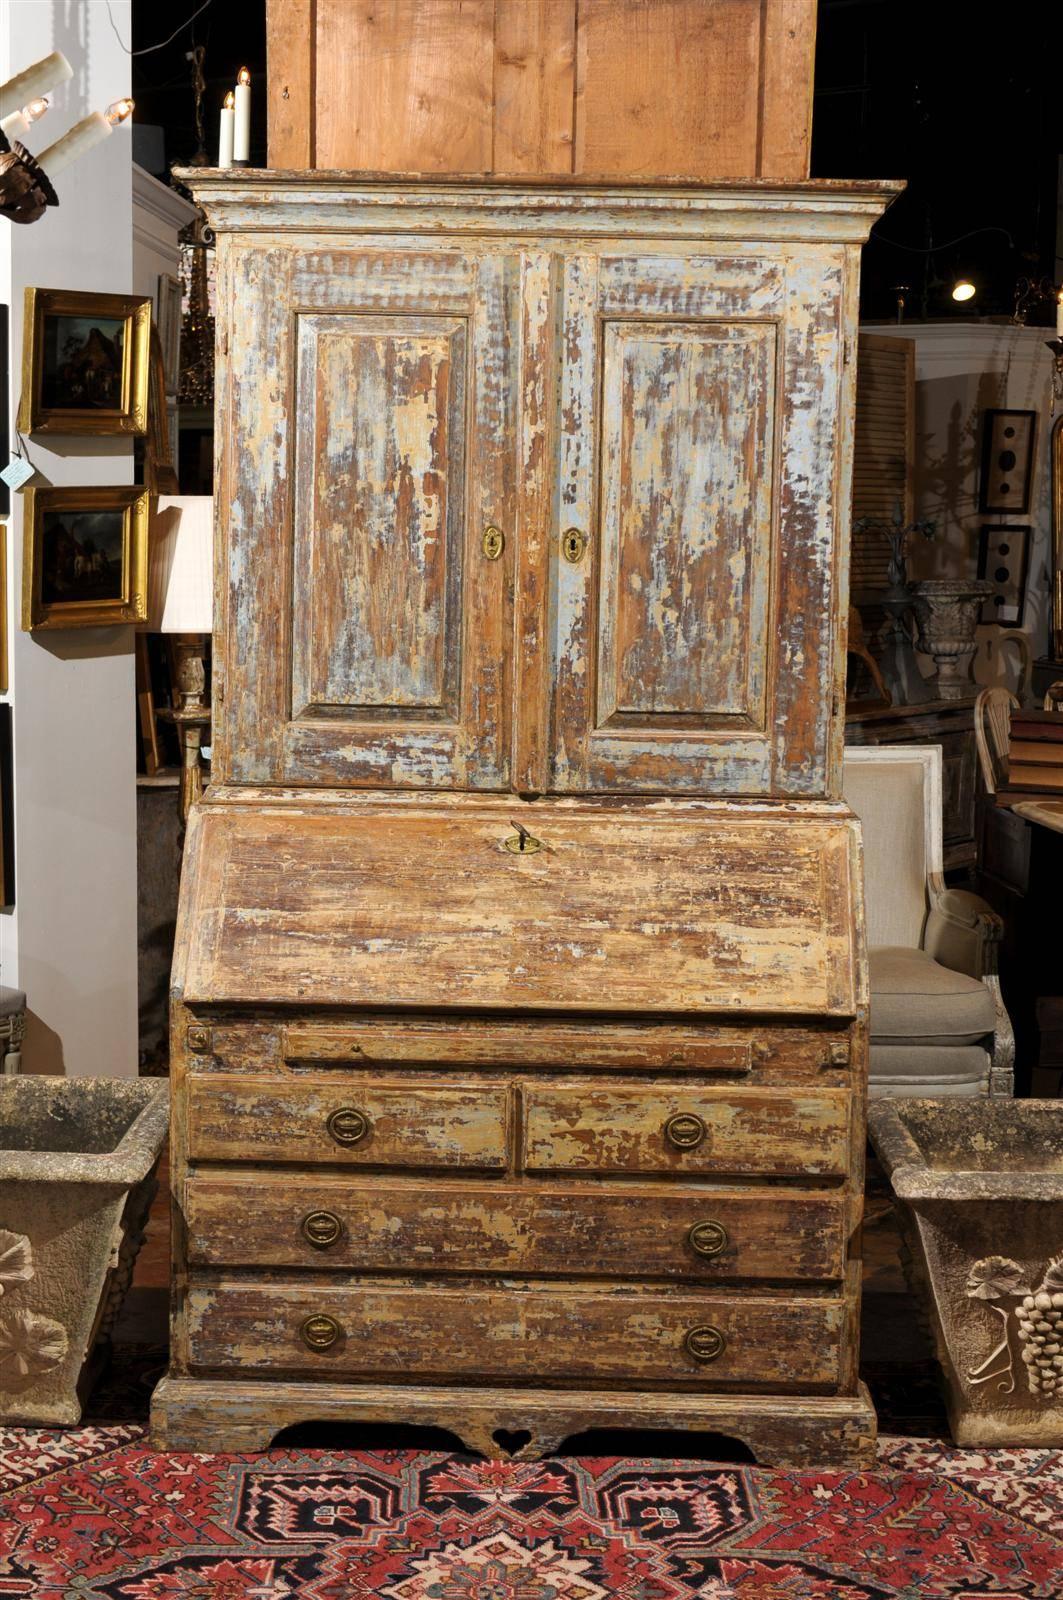 This Swedish Karl Johan style painted heart of pine slant-front secretary from the 19th century features two doors over five drawers. The general appearance is simple and elegant, made of clean, pure lines. The upper cornice is flat and delicately